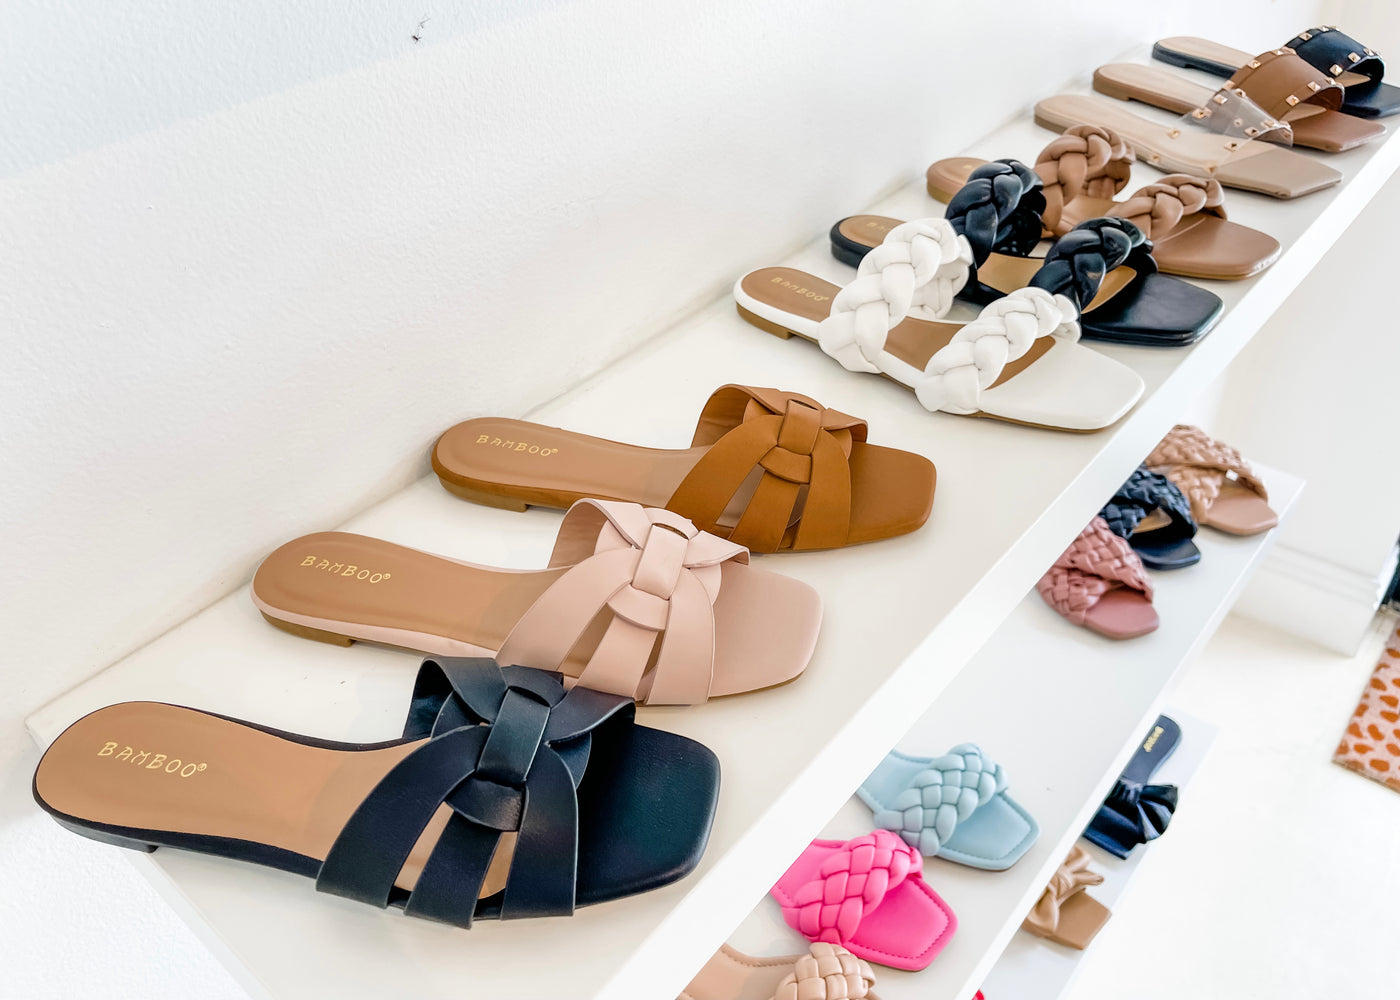 Pictured here is our most popular flat sandal, Clover-5